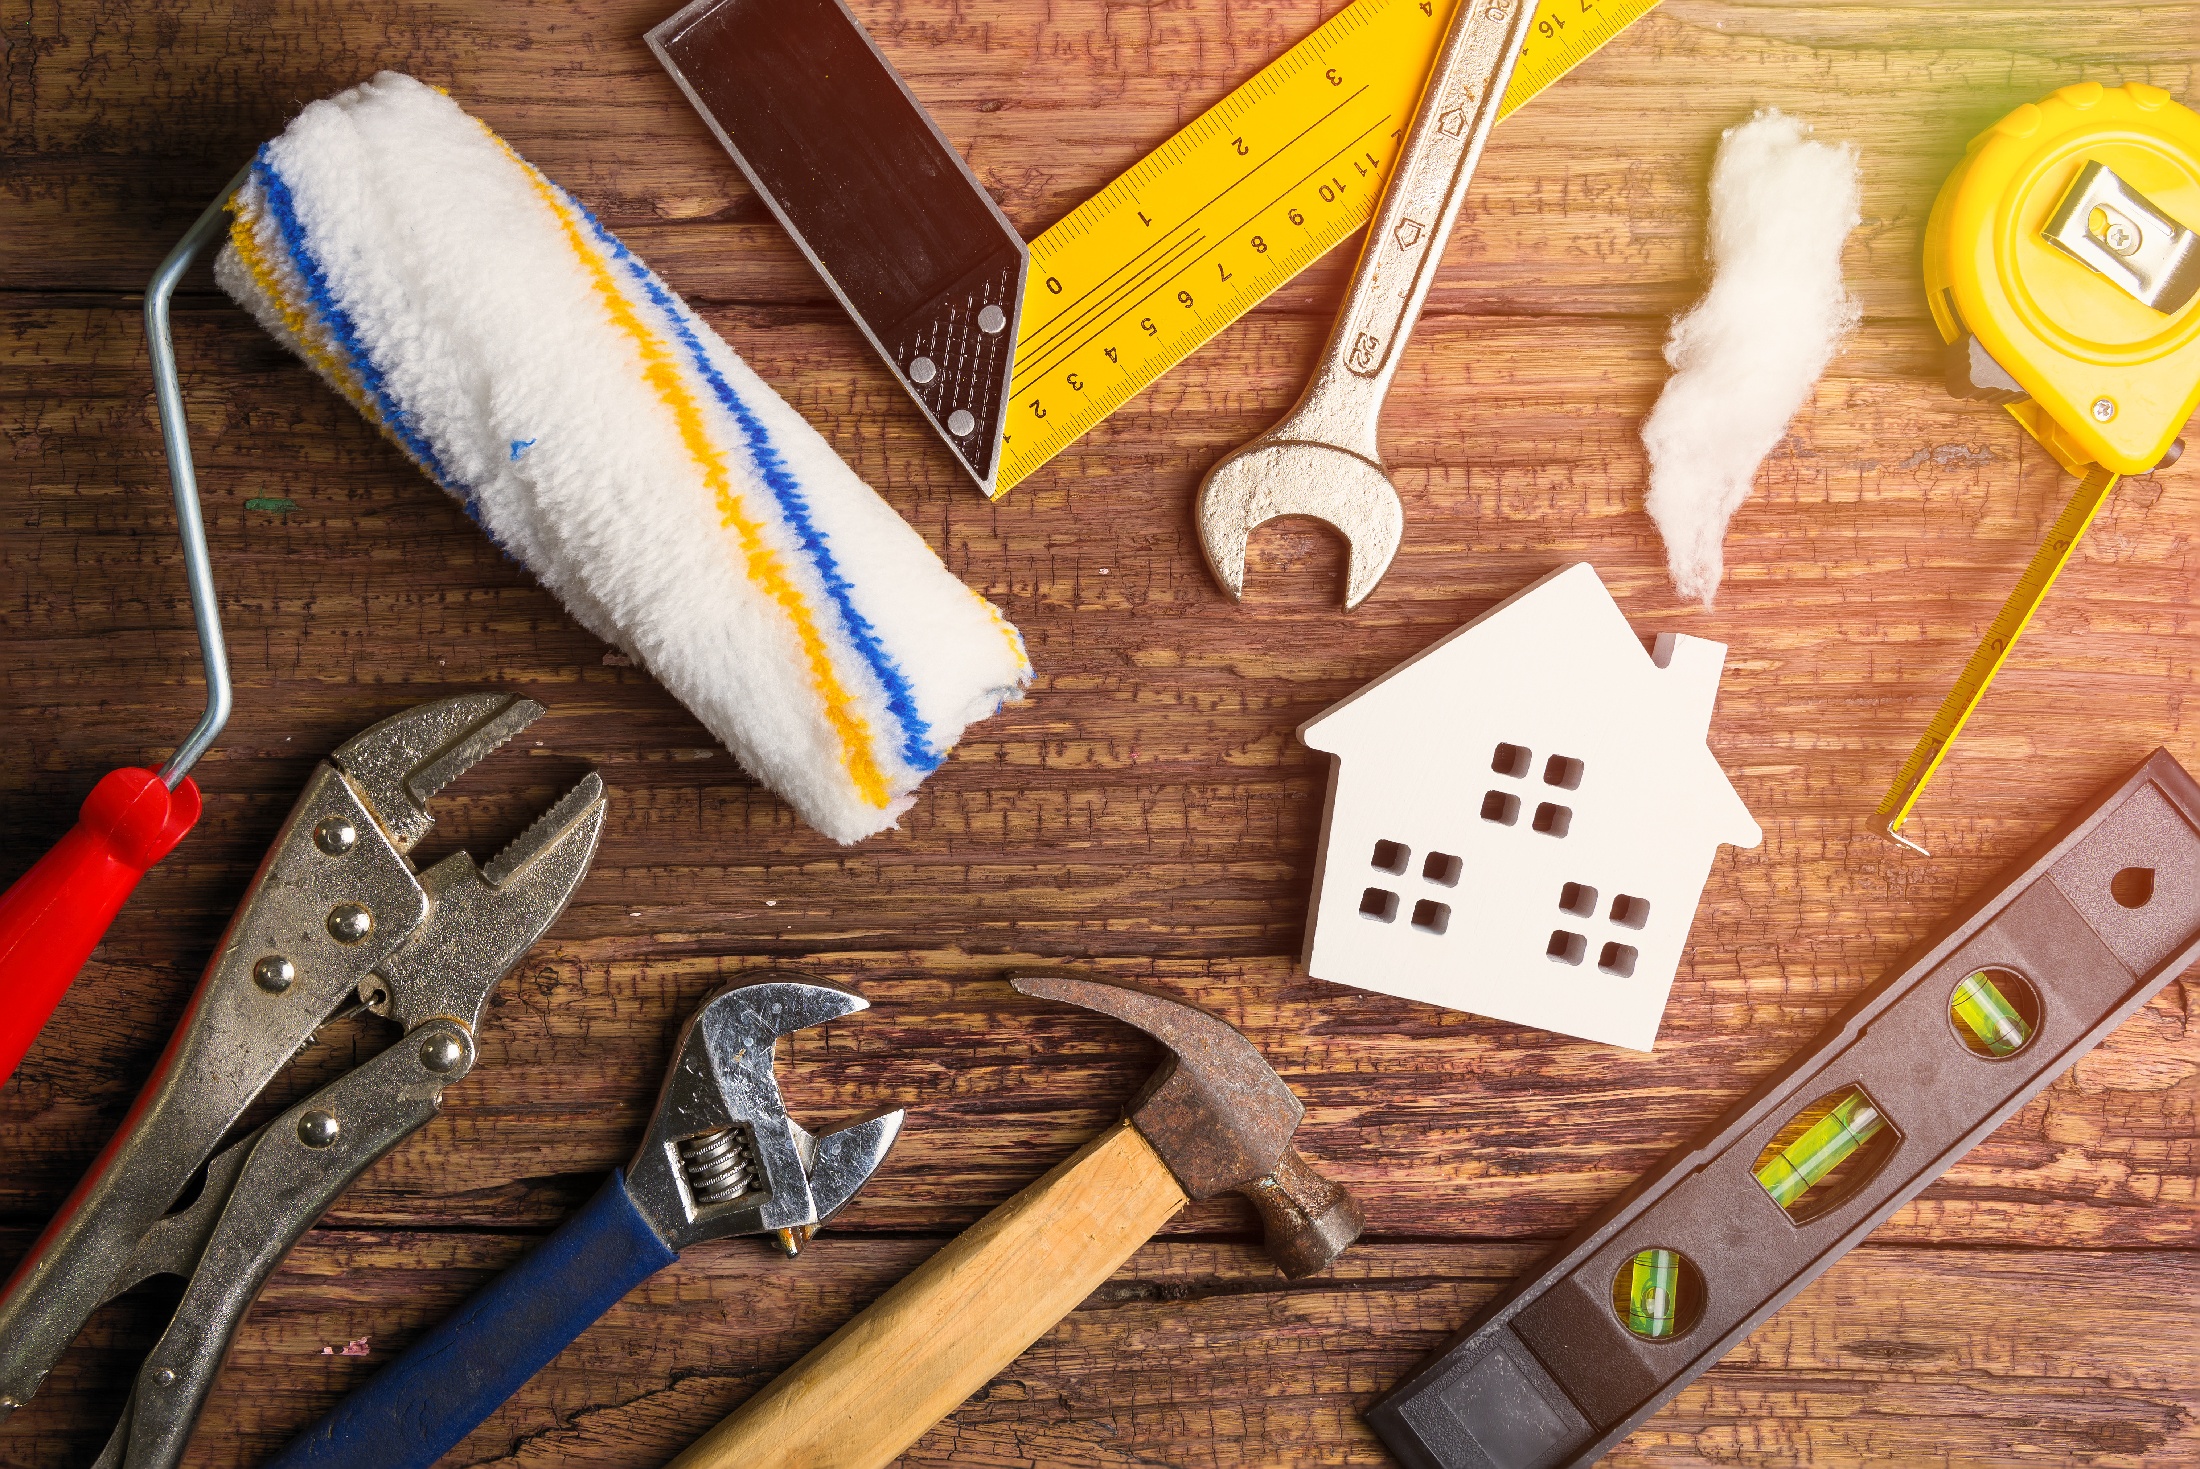 THE IMPORTANCE OF COMPLETING MAINTENANCE AT YOUR RENTAL PROPERTY